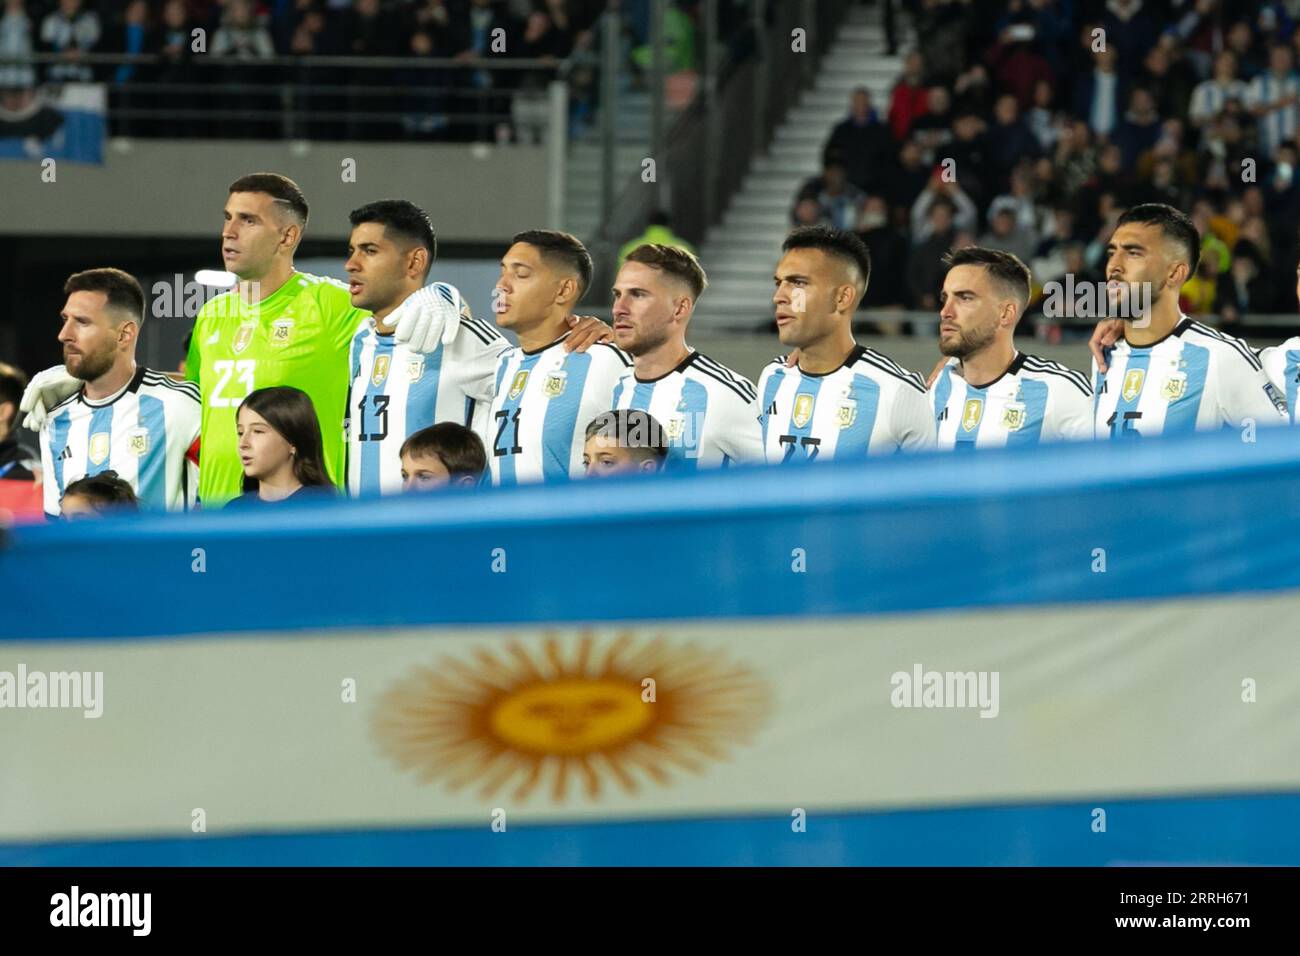 Buenos Aires, Argentina. 08th Sep, 2023. BUENOS AIRES, ARGENTINA - SEPTEMBER 7: Players of Argentina prior to the FIFA World Cup 2026 Qualifier match between Argentina and Ecuador at Estadio Más Monumental Antonio Vespucio Liberti on September 07, 2023 in Buenos Aires, Argentina. (Photo by Florencia Tan Jun/Pximages) Credit: Px Images/Alamy Live News Stock Photo